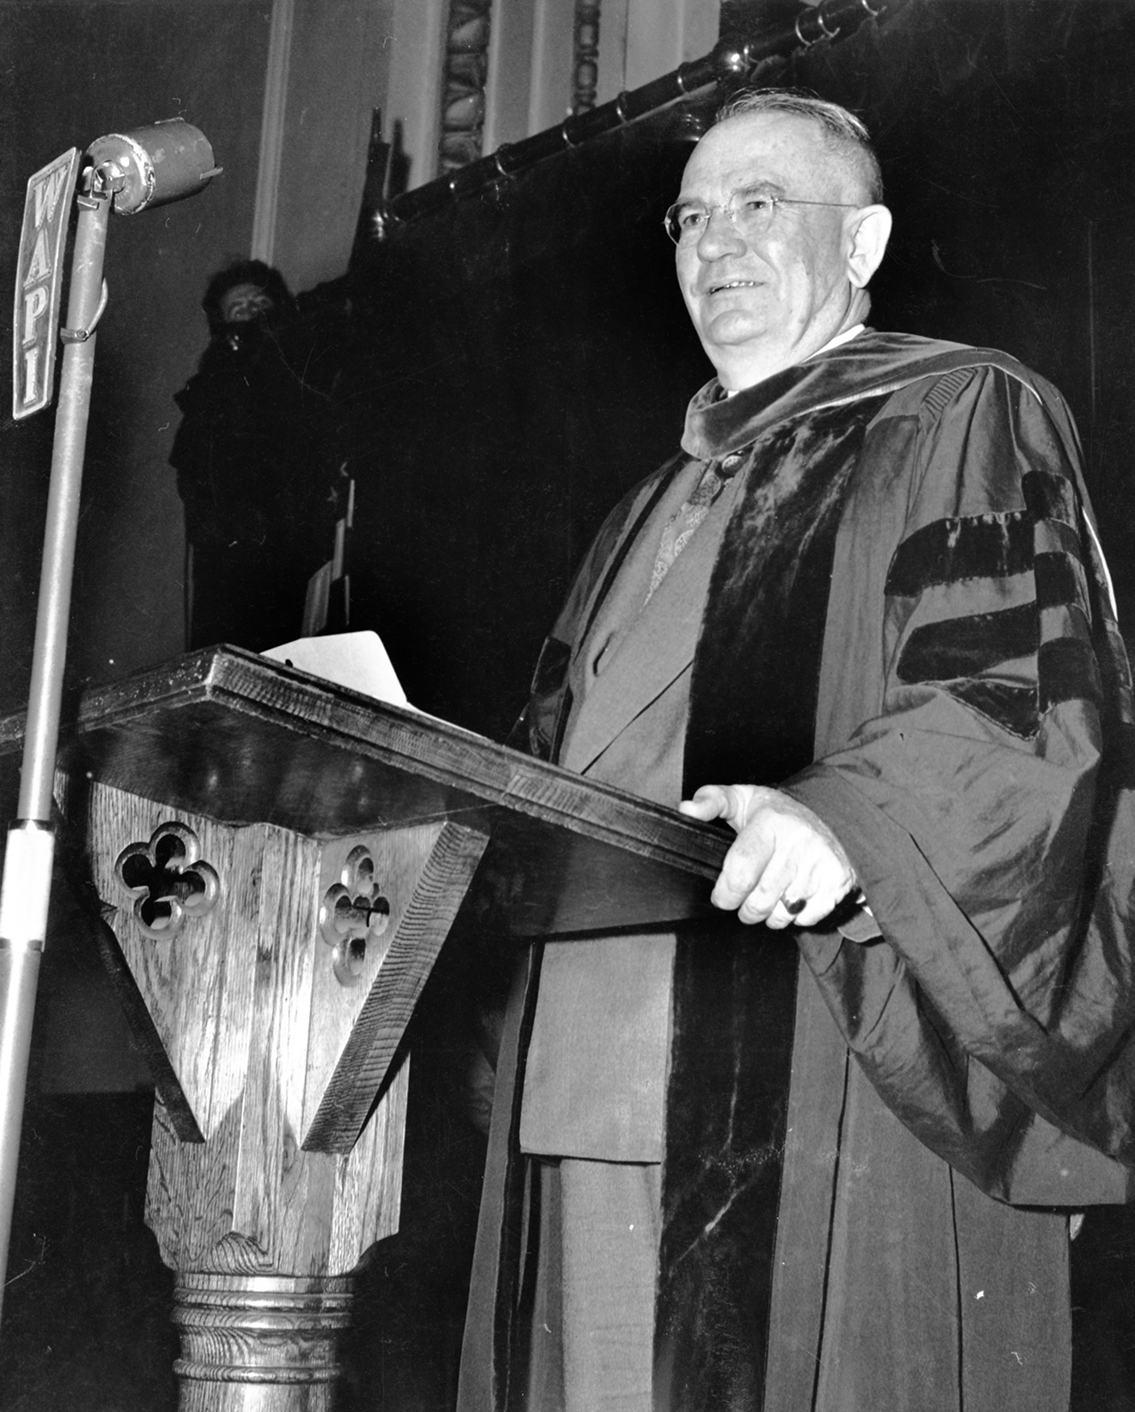 1943- Governor Chauncey Sparks Supports the Jones Bill to Establish a 4 Year Medical School in Birmingham